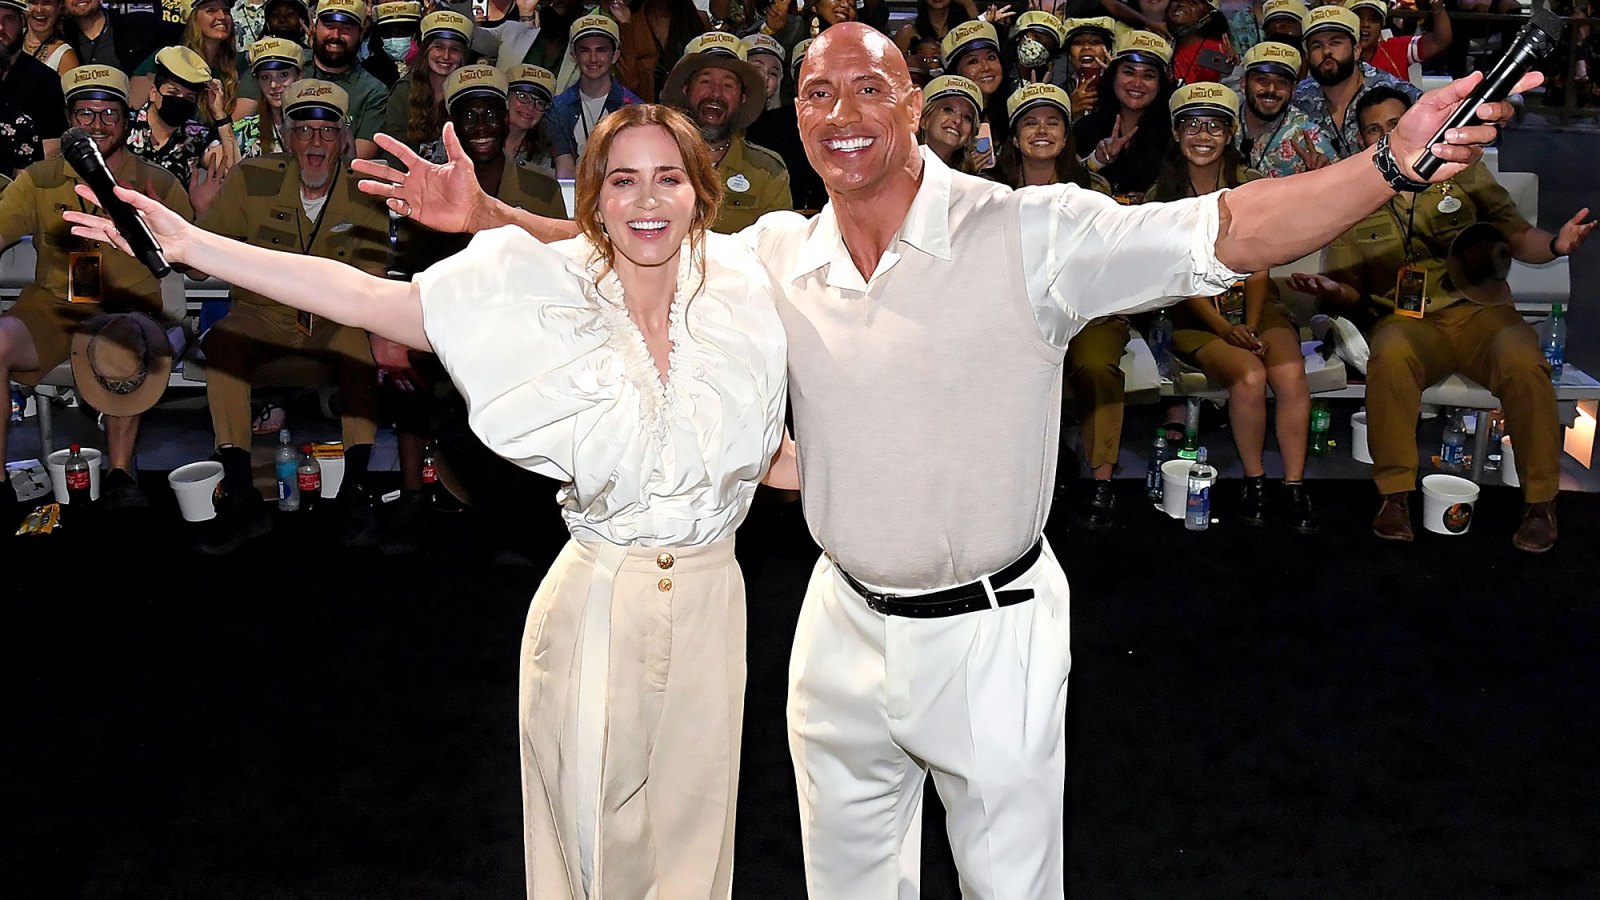 Dwayne Johnson’s ‘Jungle Cruise' Earns $92 Million During Massive Opening Weekend